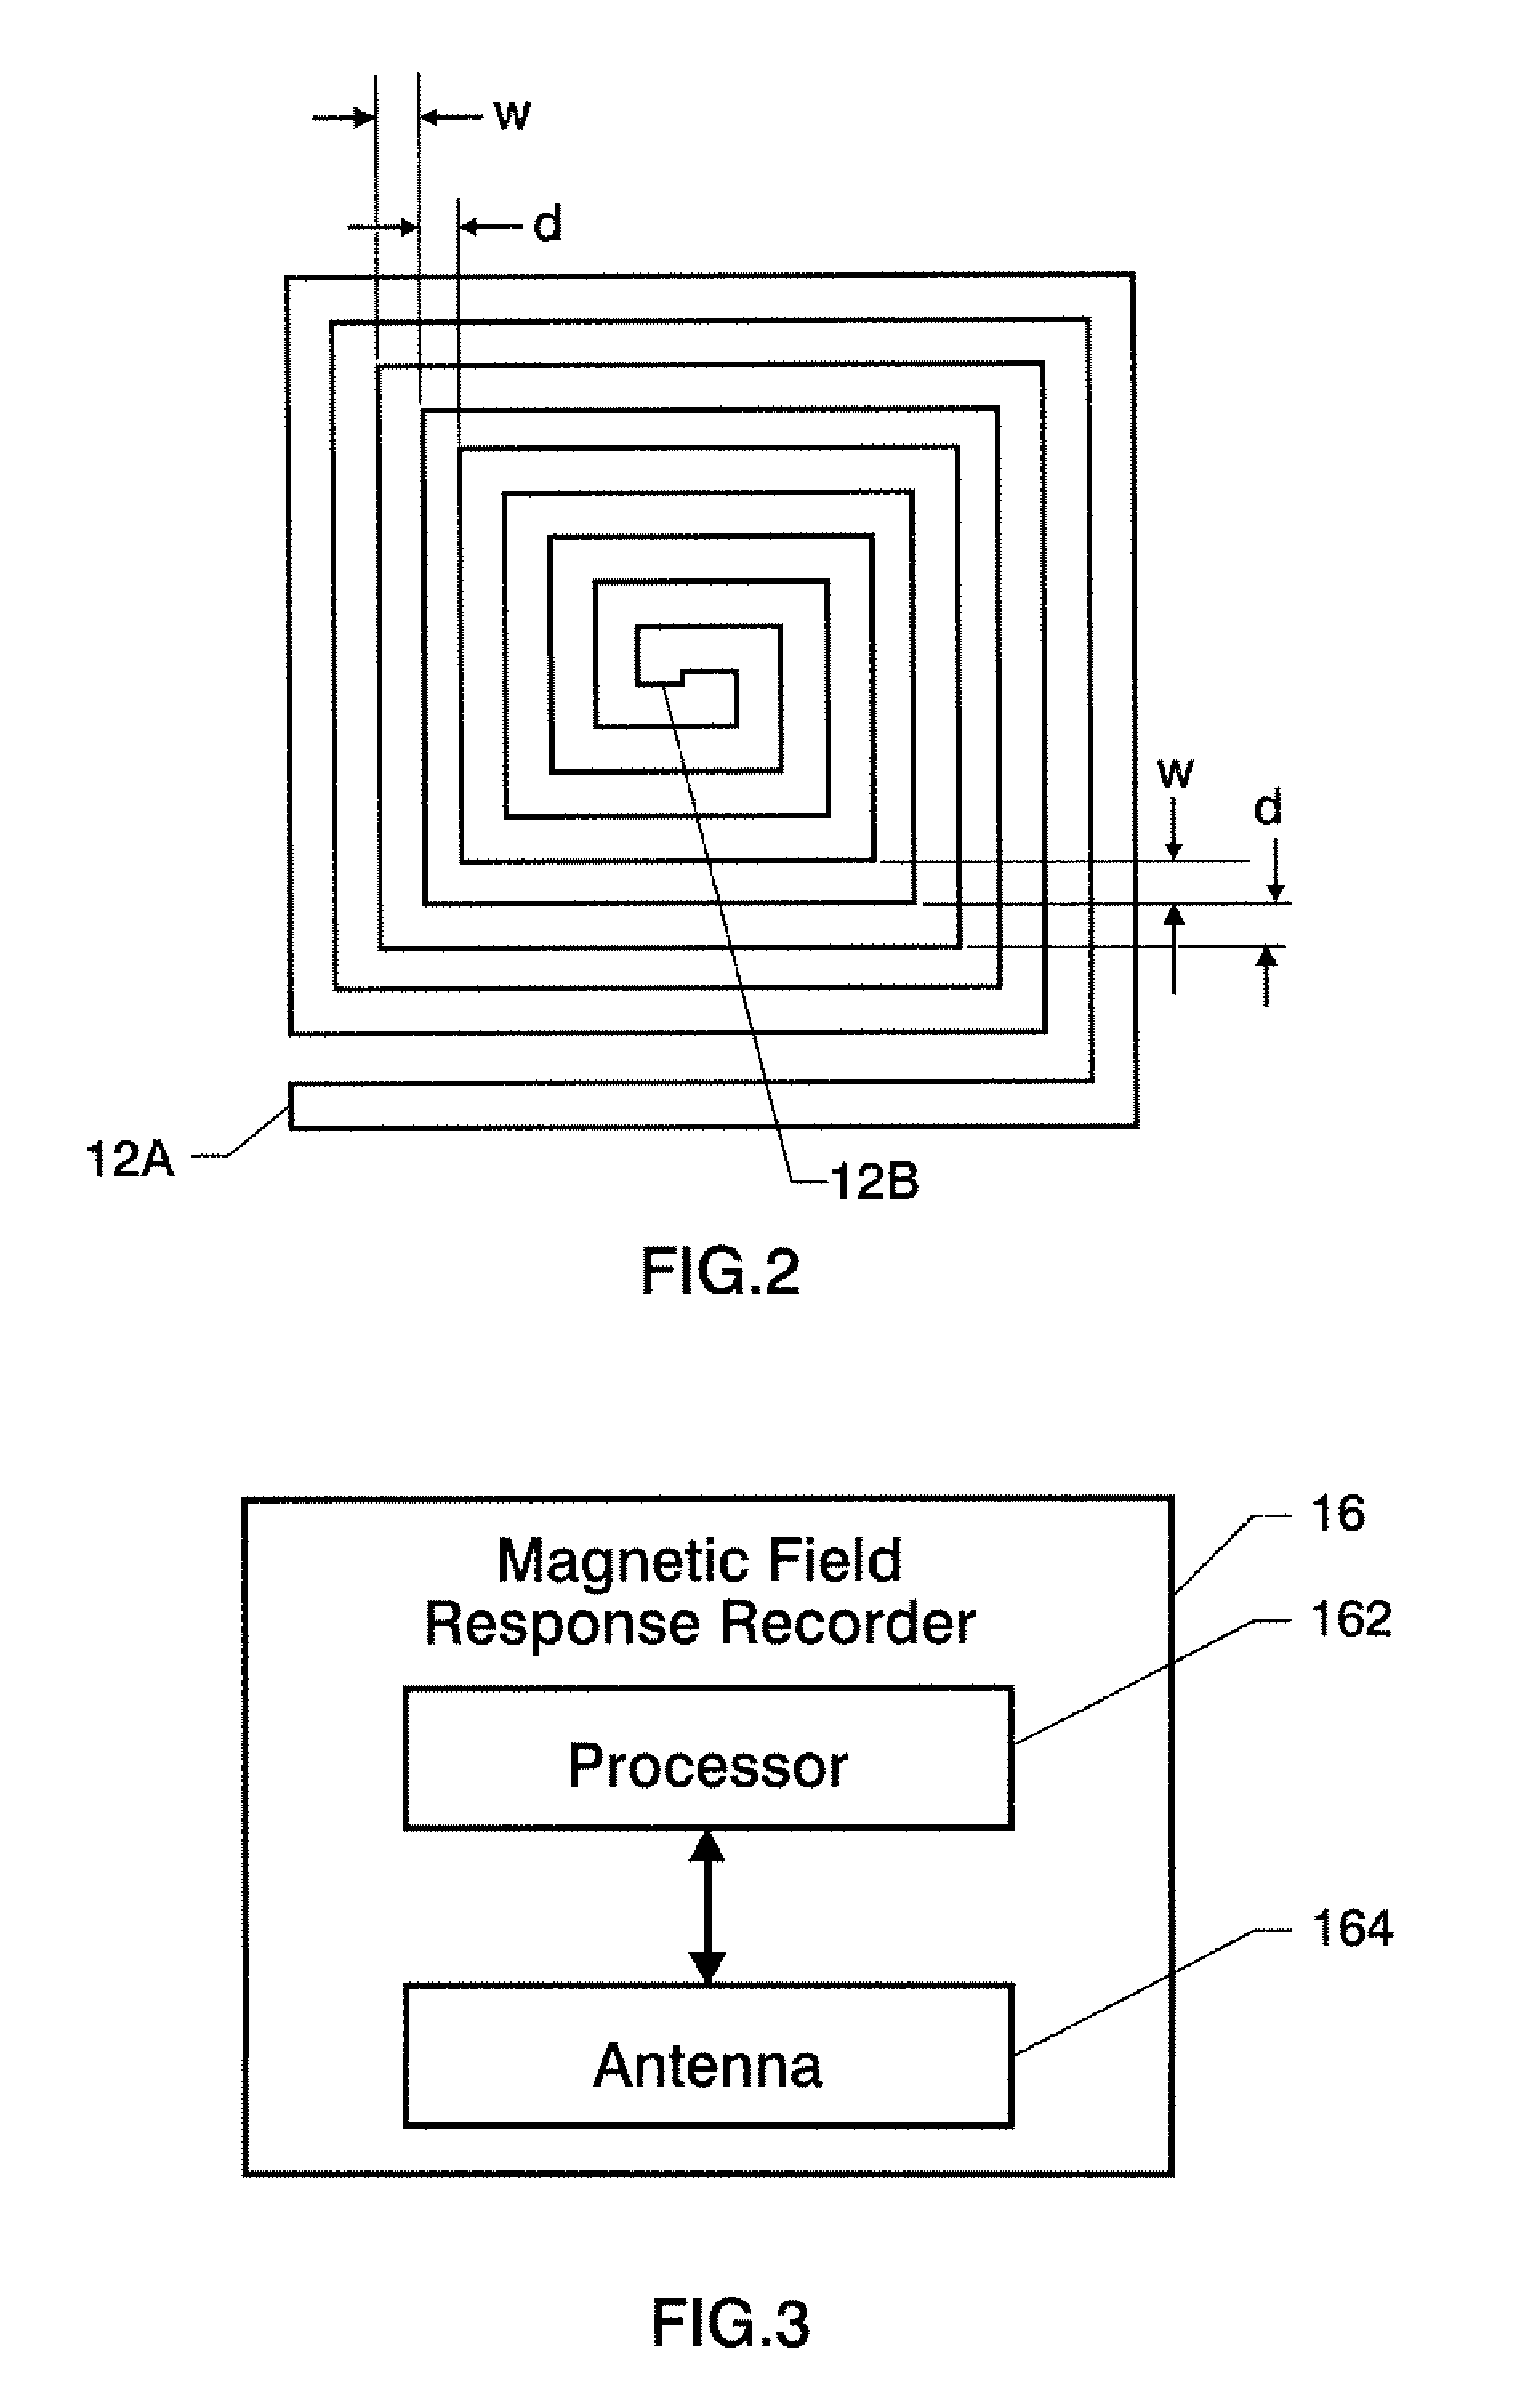 Wireless sensing system for non-invasive monitoring of attributes of contents in a container